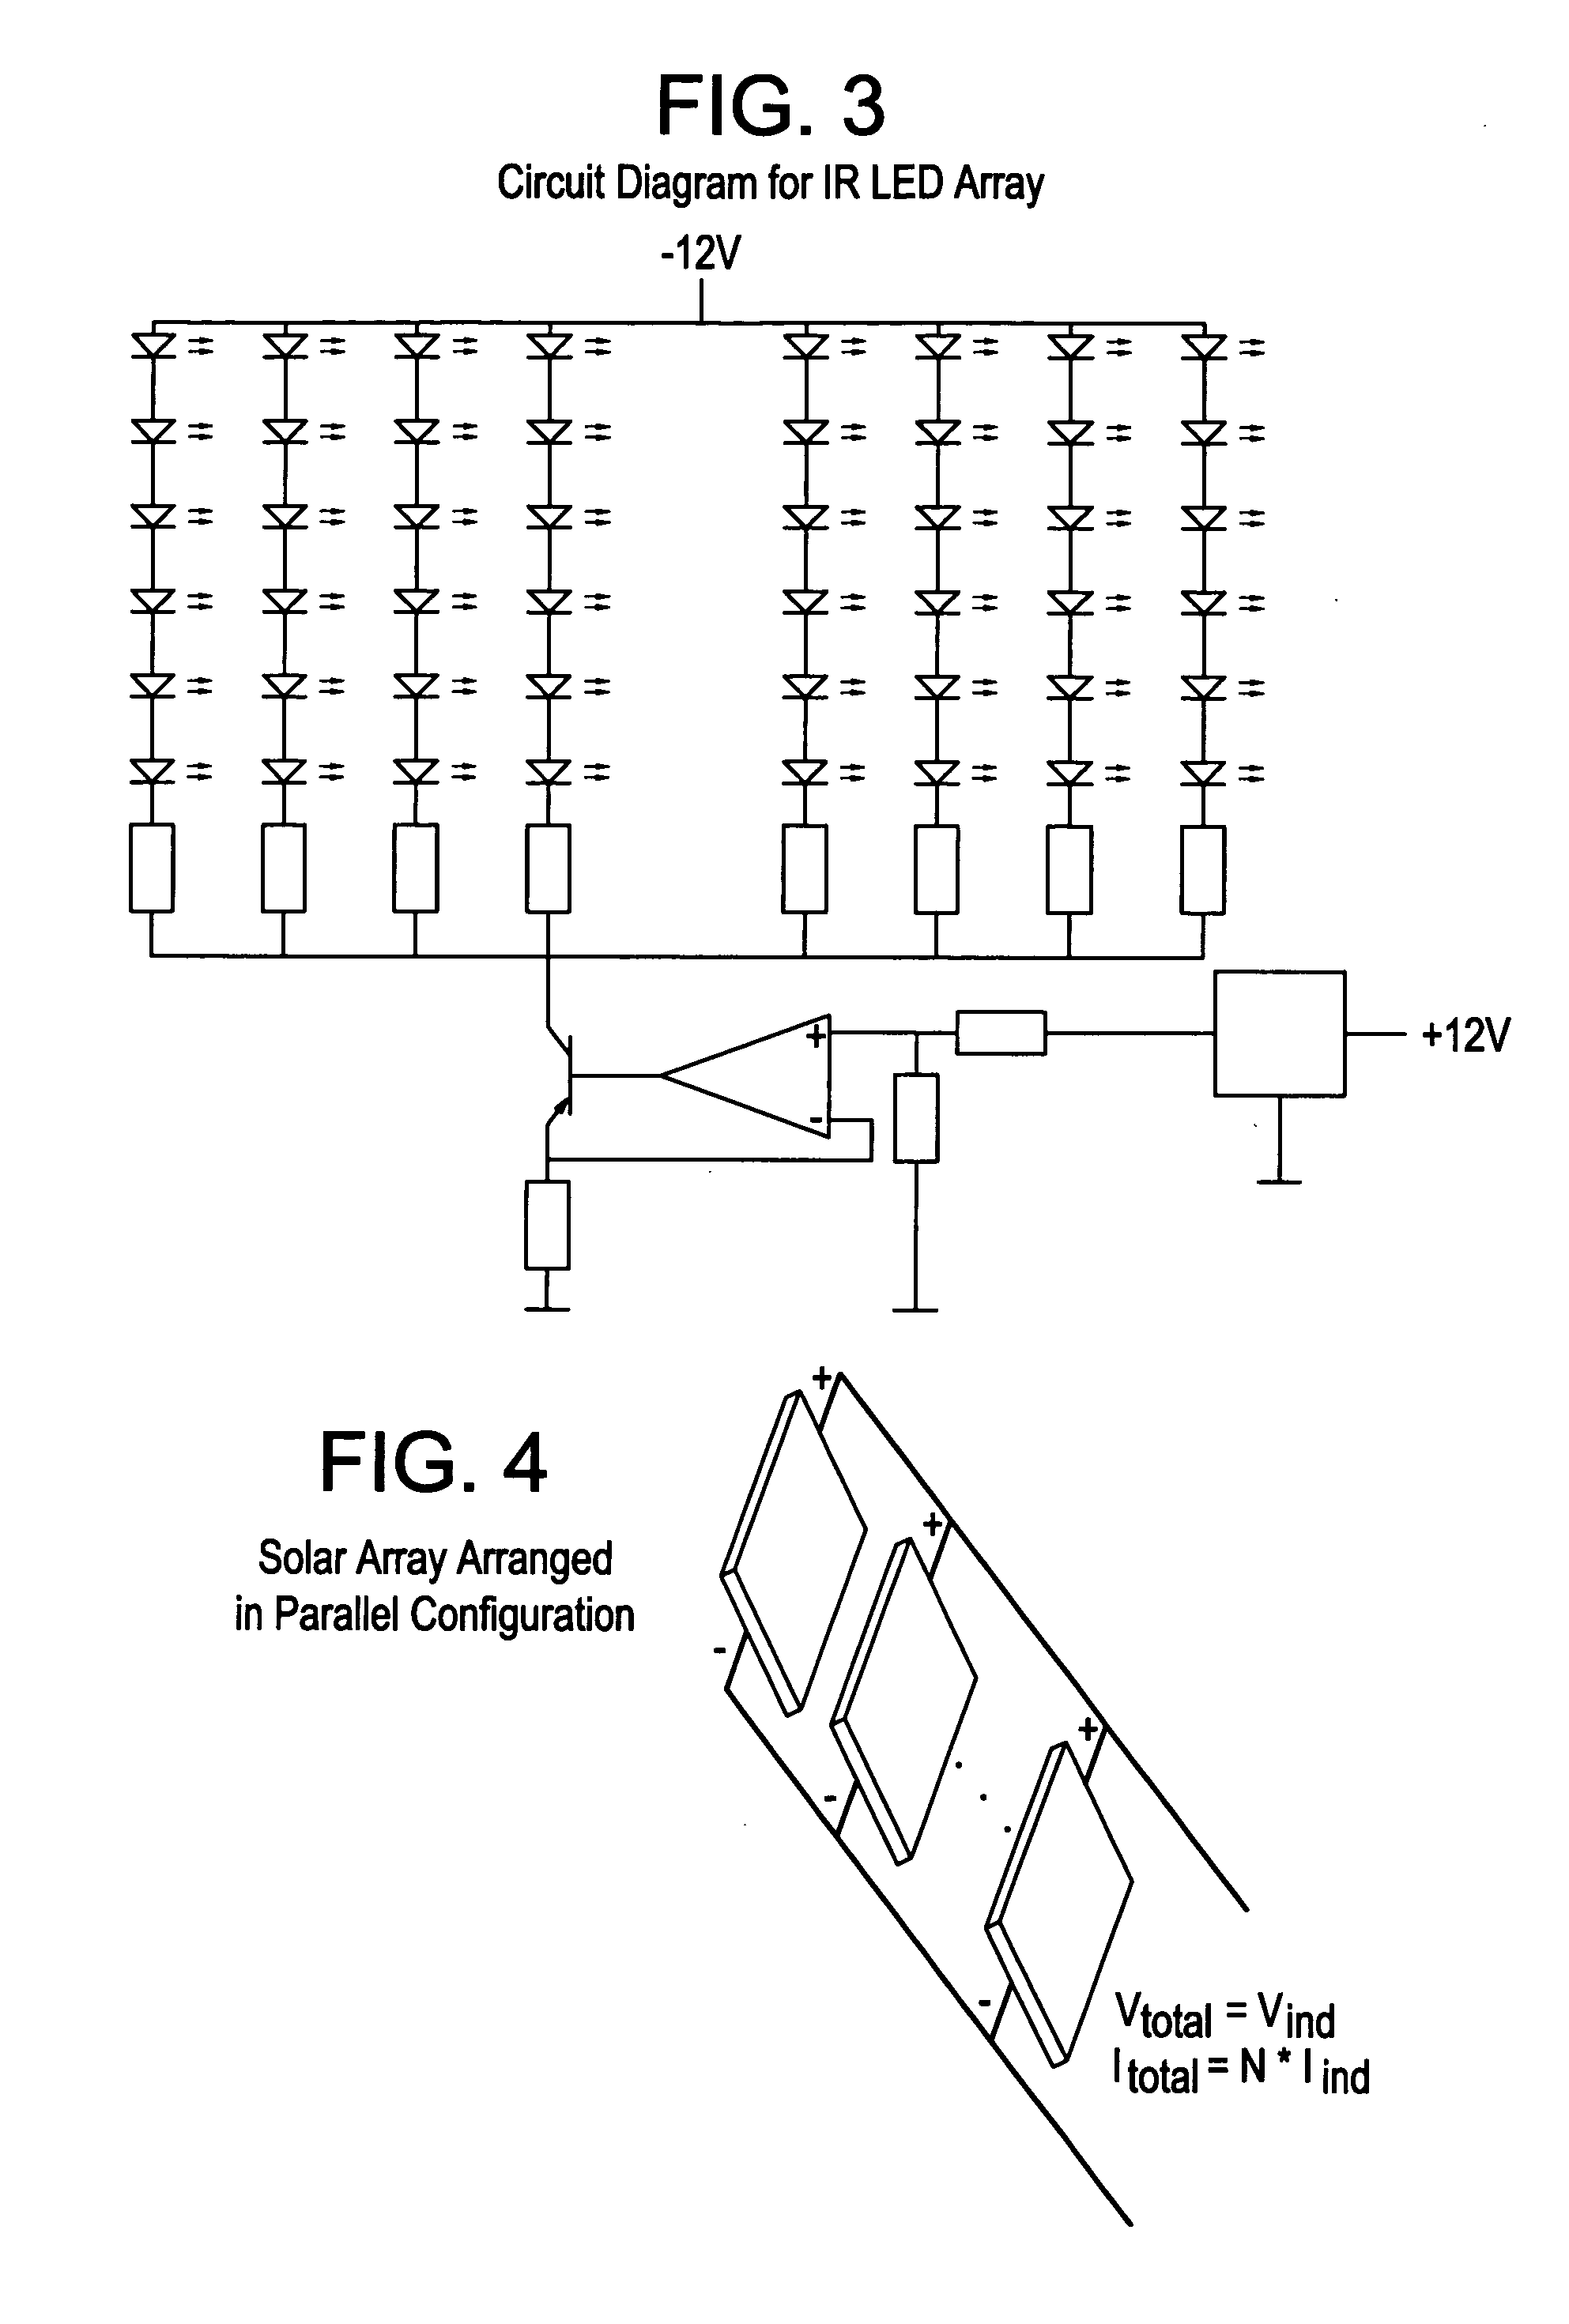 Apparatus and method for transferring DC power and RF signals through a transparent or substantially transparent medium for antenna reception